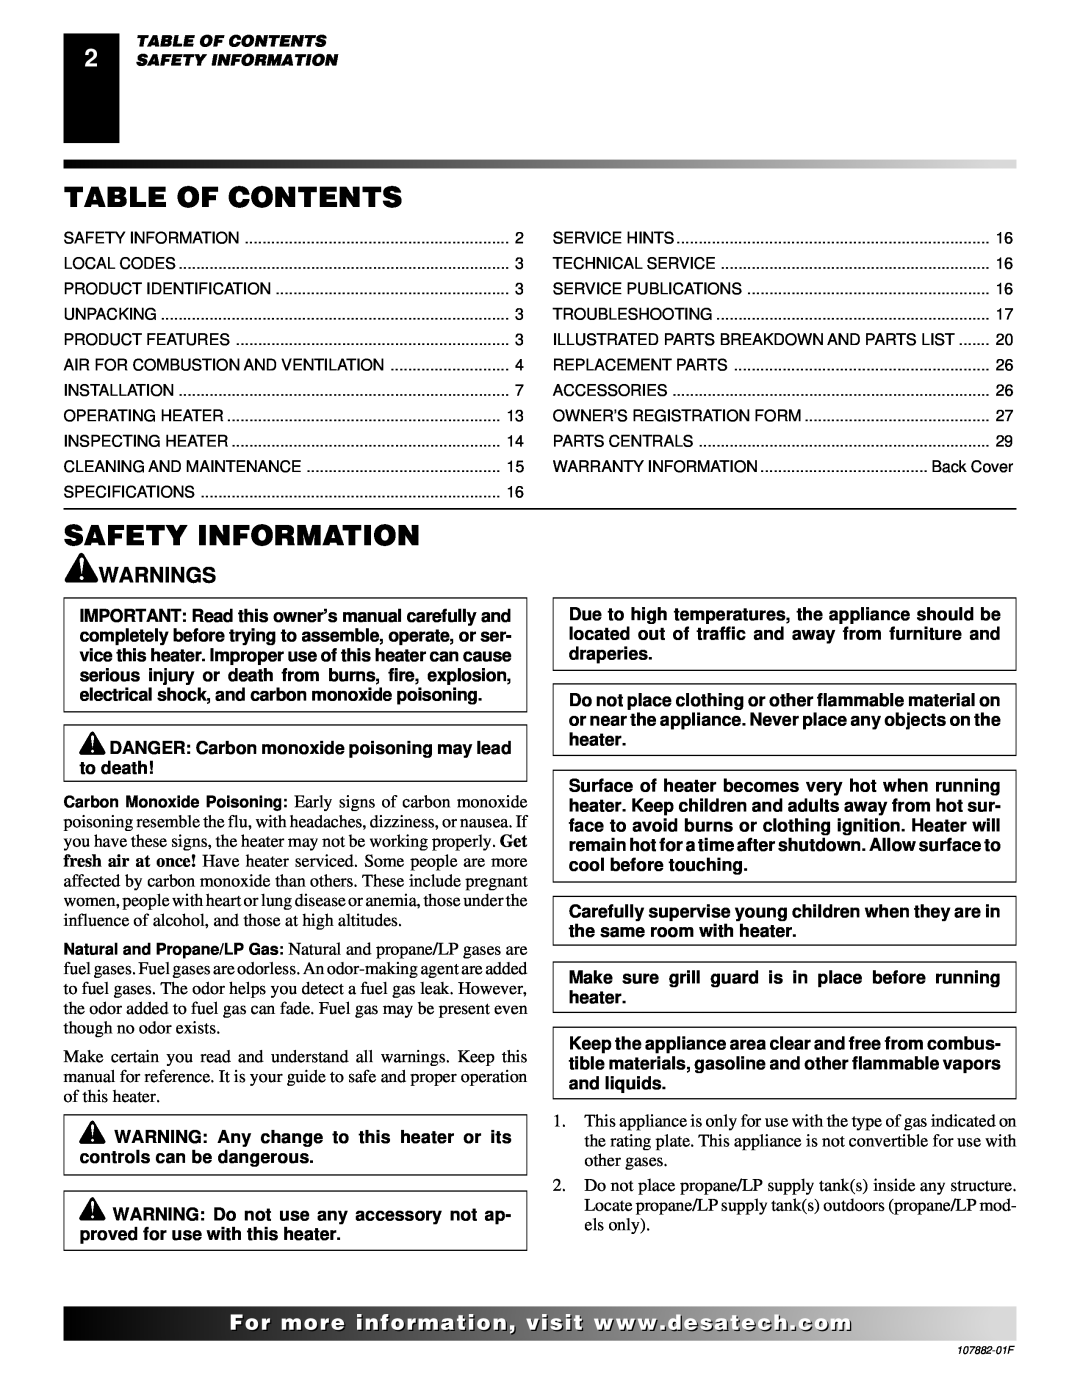 Desa CBN20 installation manual Table Of Contents, Safety Information, Warnings 